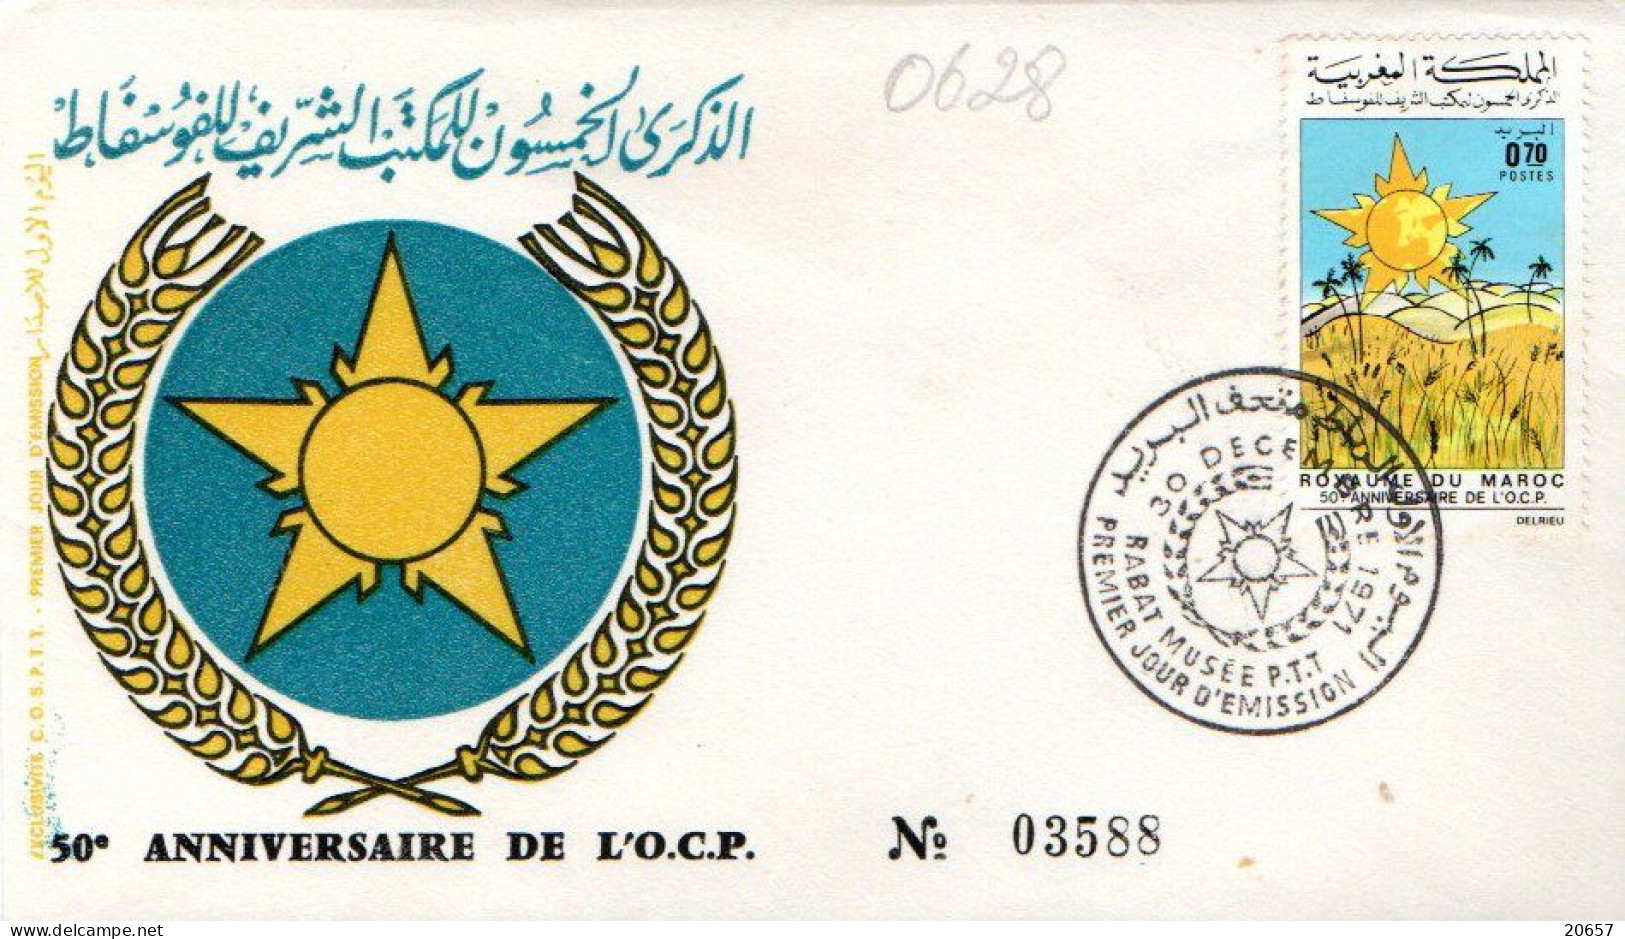 Maroc Al Maghrib 0628 Fdc Phosphates, Agriculture - Mineralien